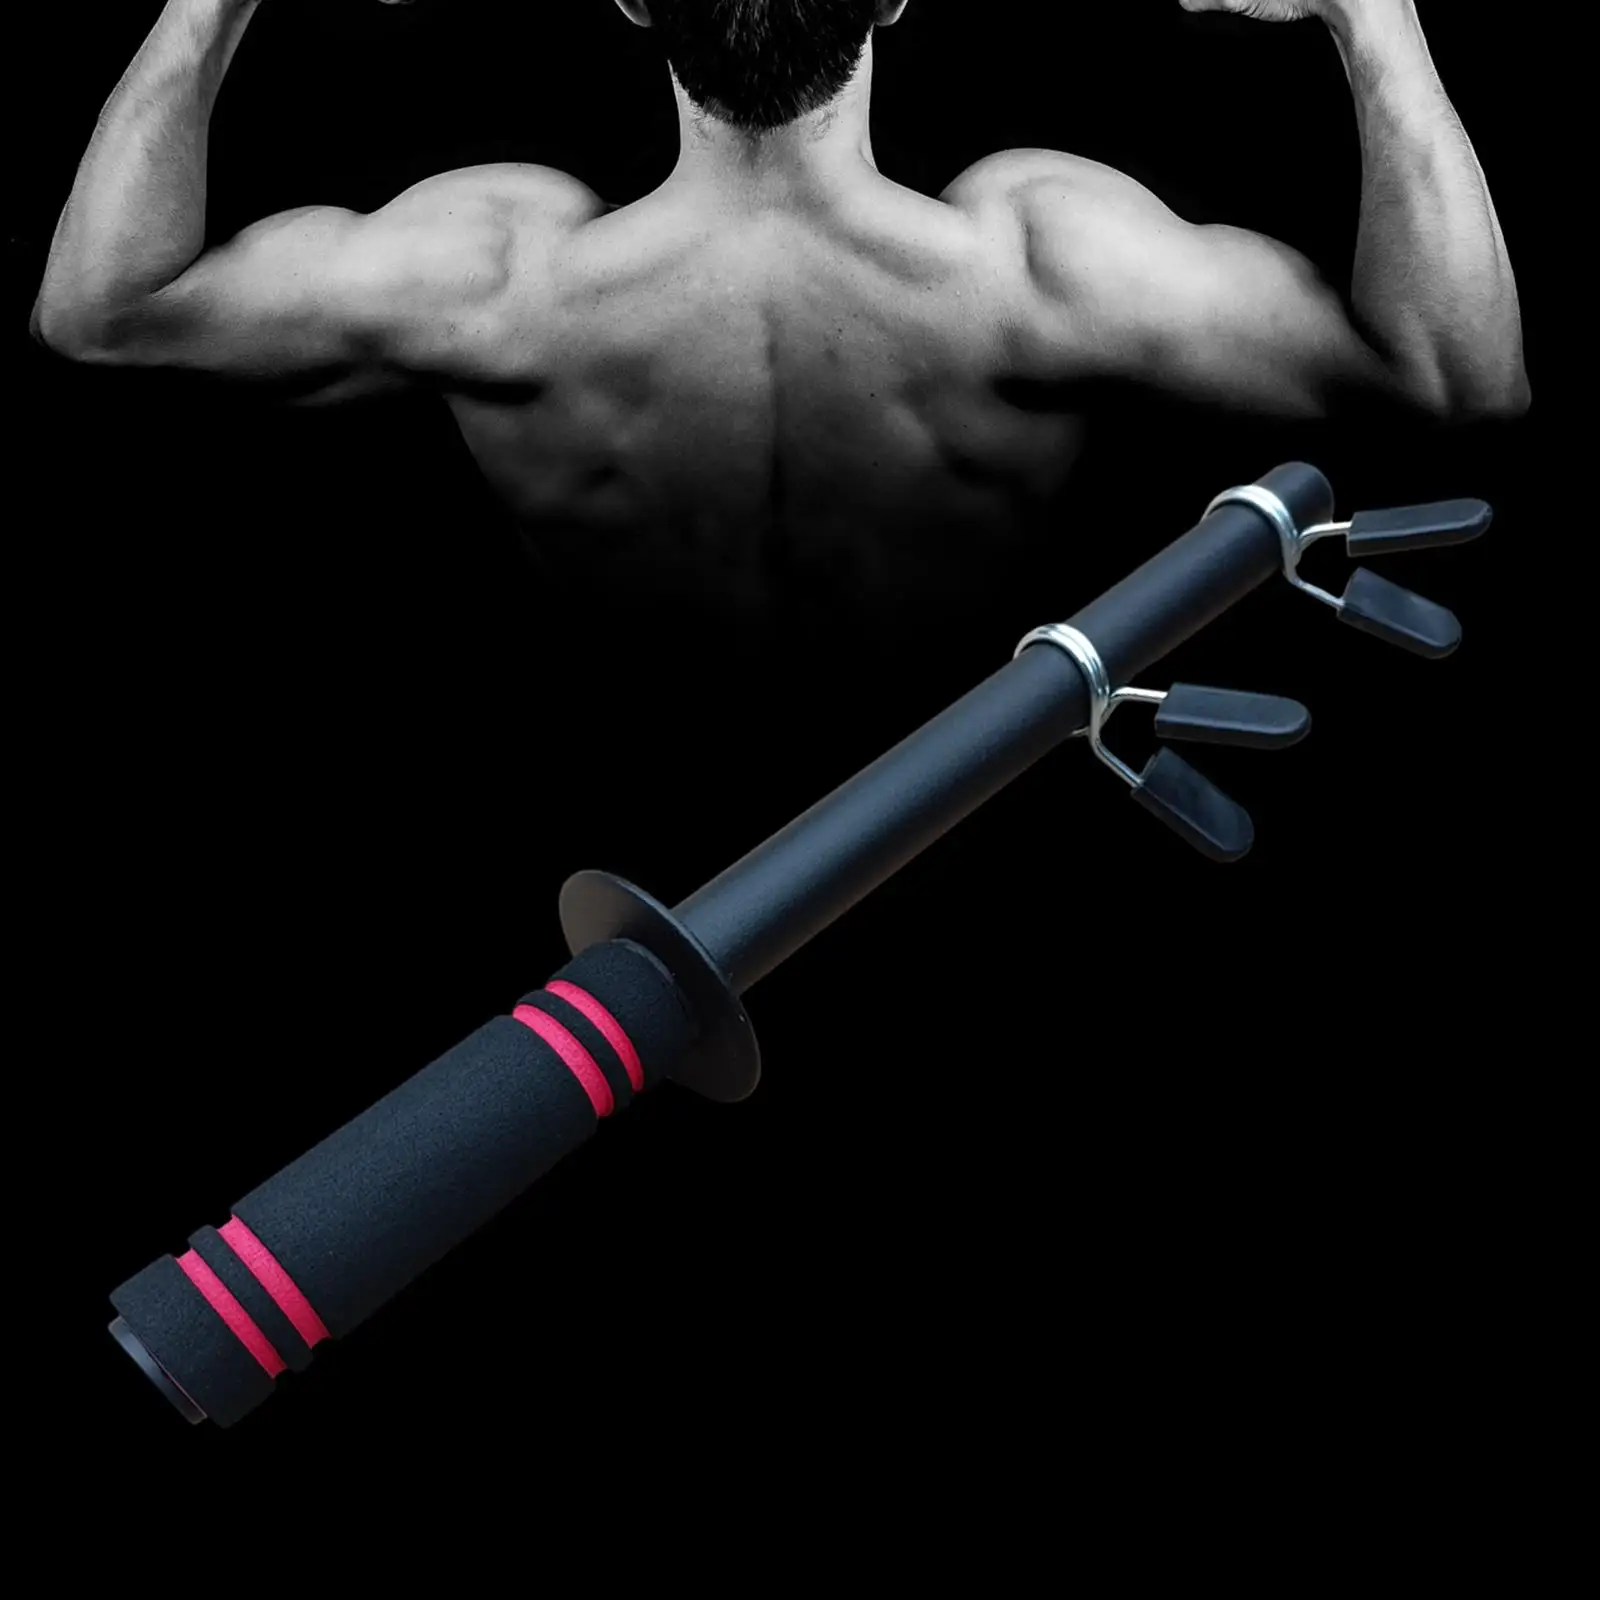 Dumbbell Hand Grip Strength Training Work Out Supplies Adjustable Forearm Strength Exerciser for Wrist Fitness Equipment